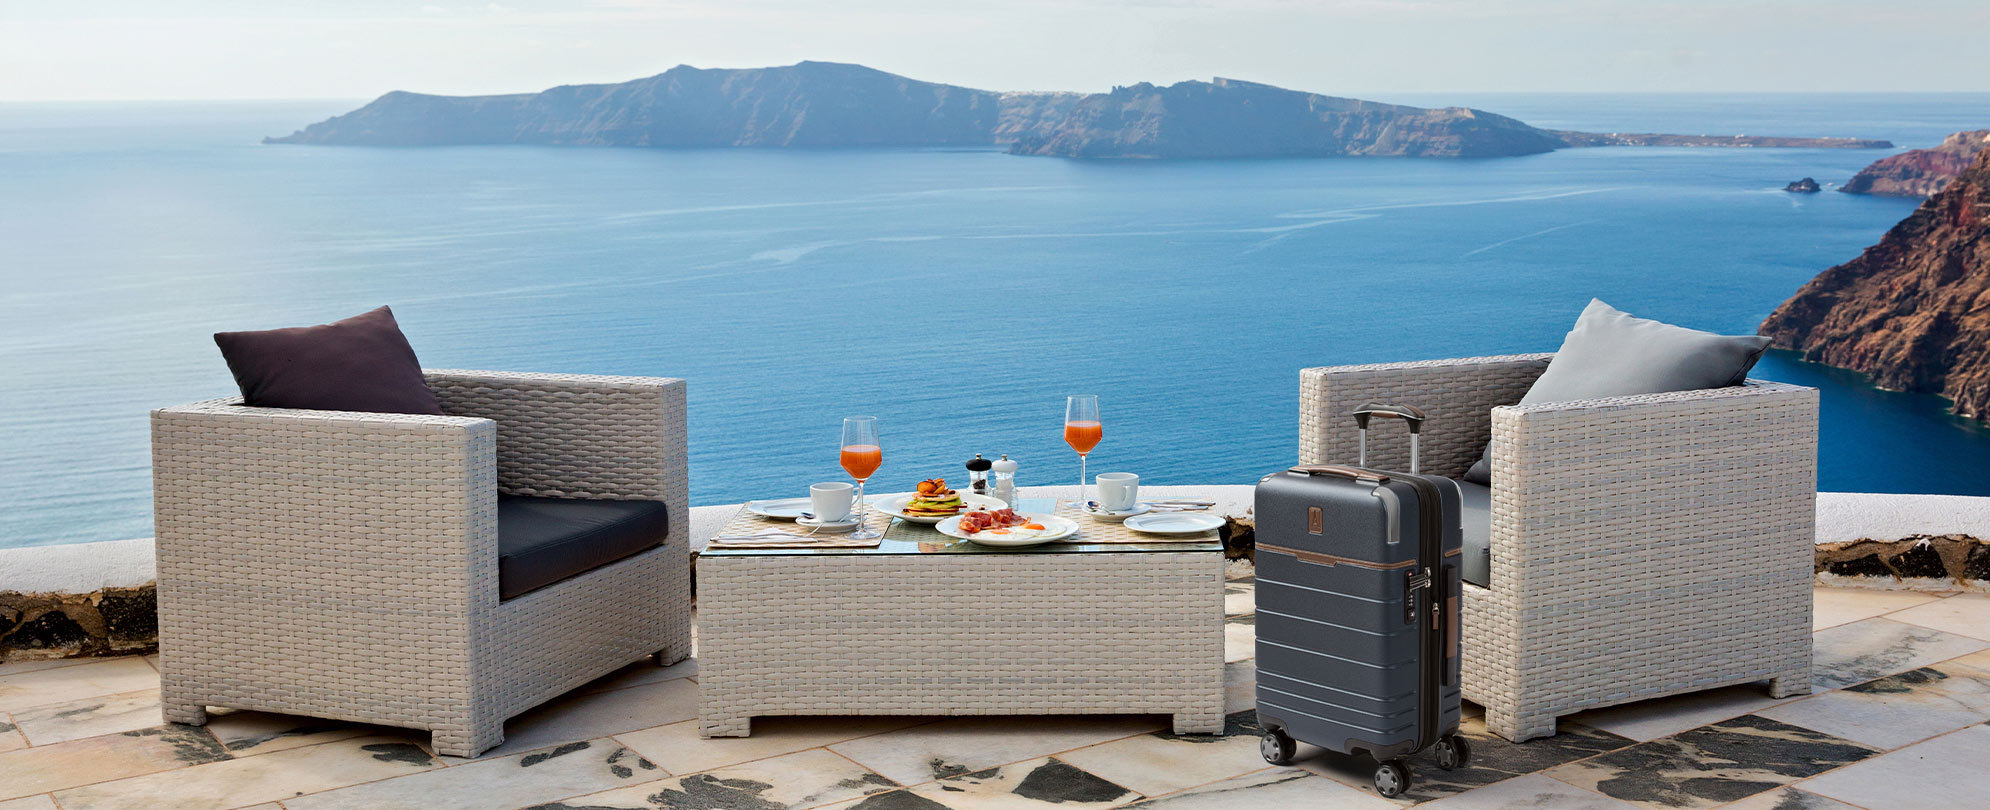 A TravelPro suitcase in front of two outdoor chairs with an ocean view and a coffee table with food.